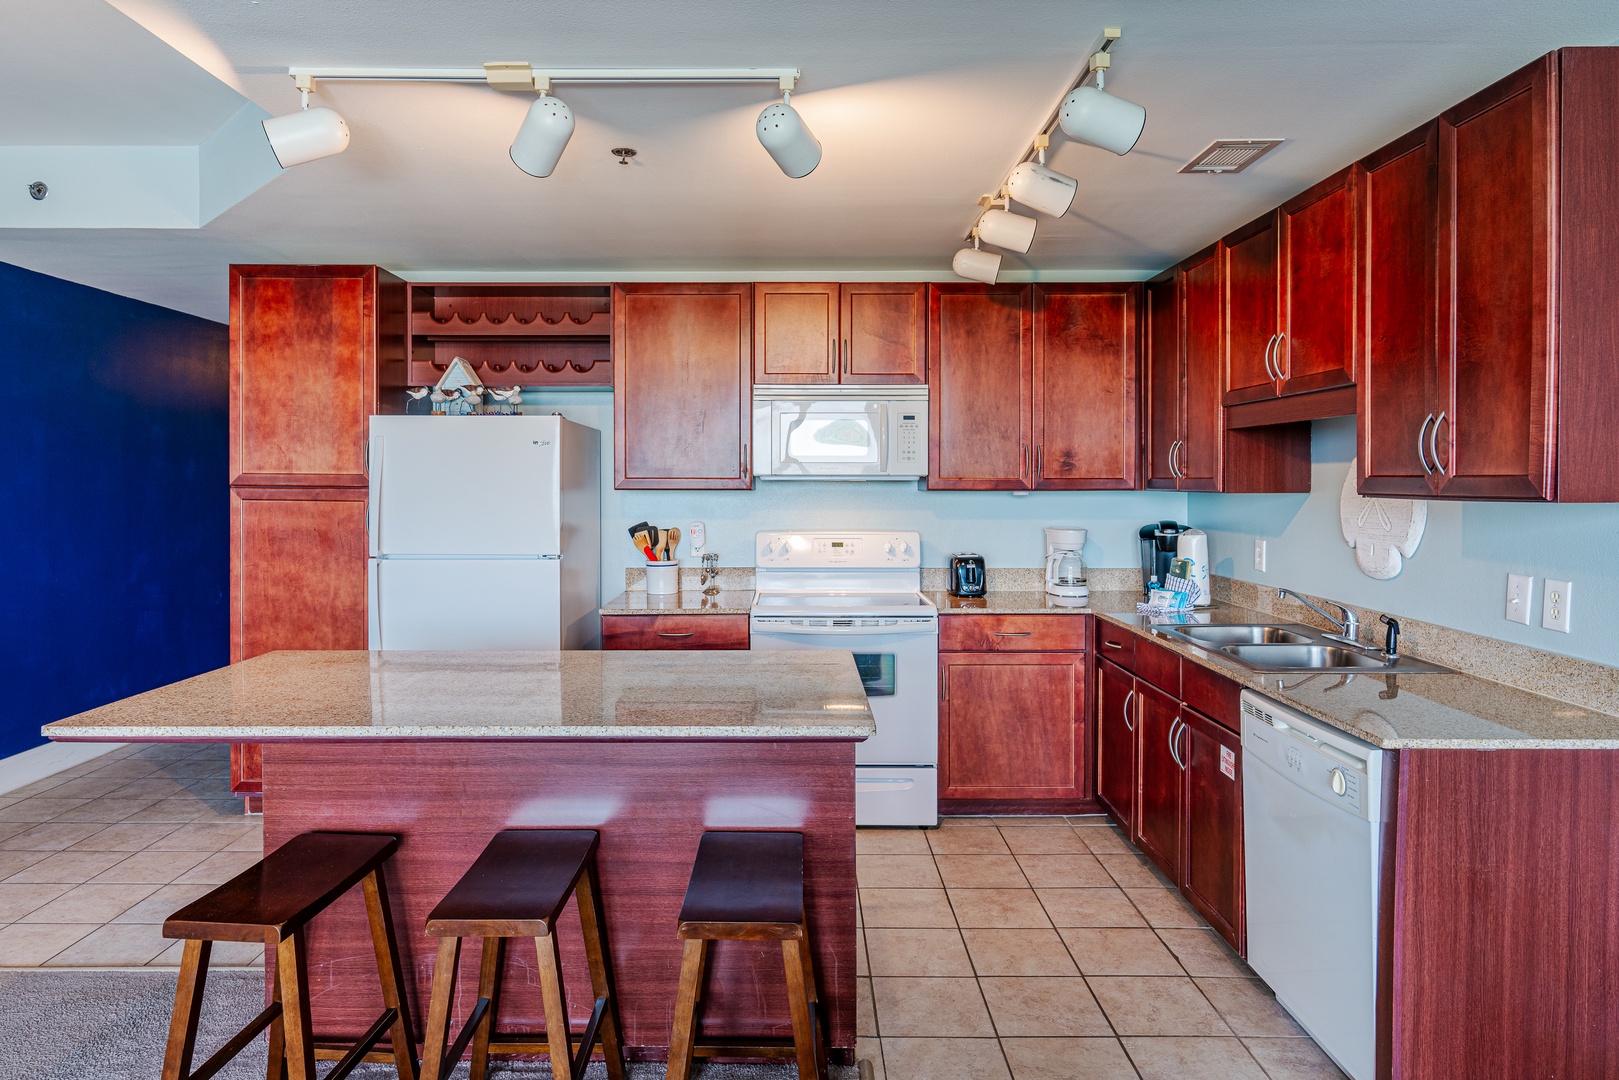 Sip morning coffee or enjoy a meal at the kitchen counter, with seating for 3